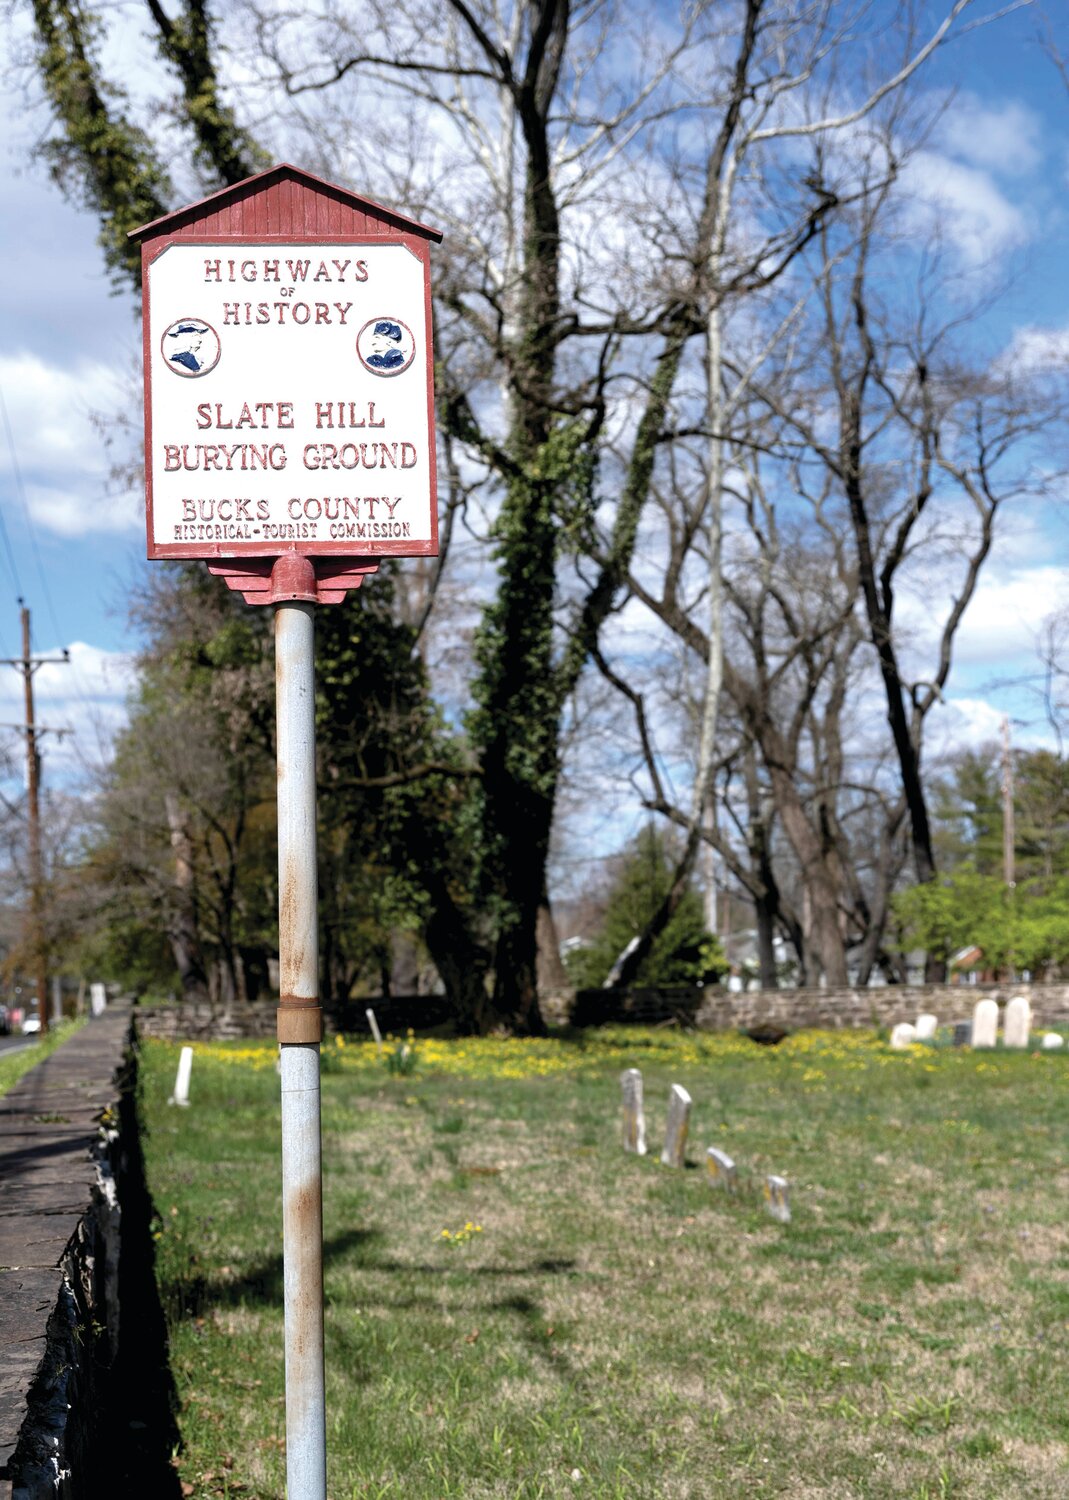 A small sign marks the location of Slate Hill Burying Ground on Yardley-Morrisville Road in Lower Makefield.